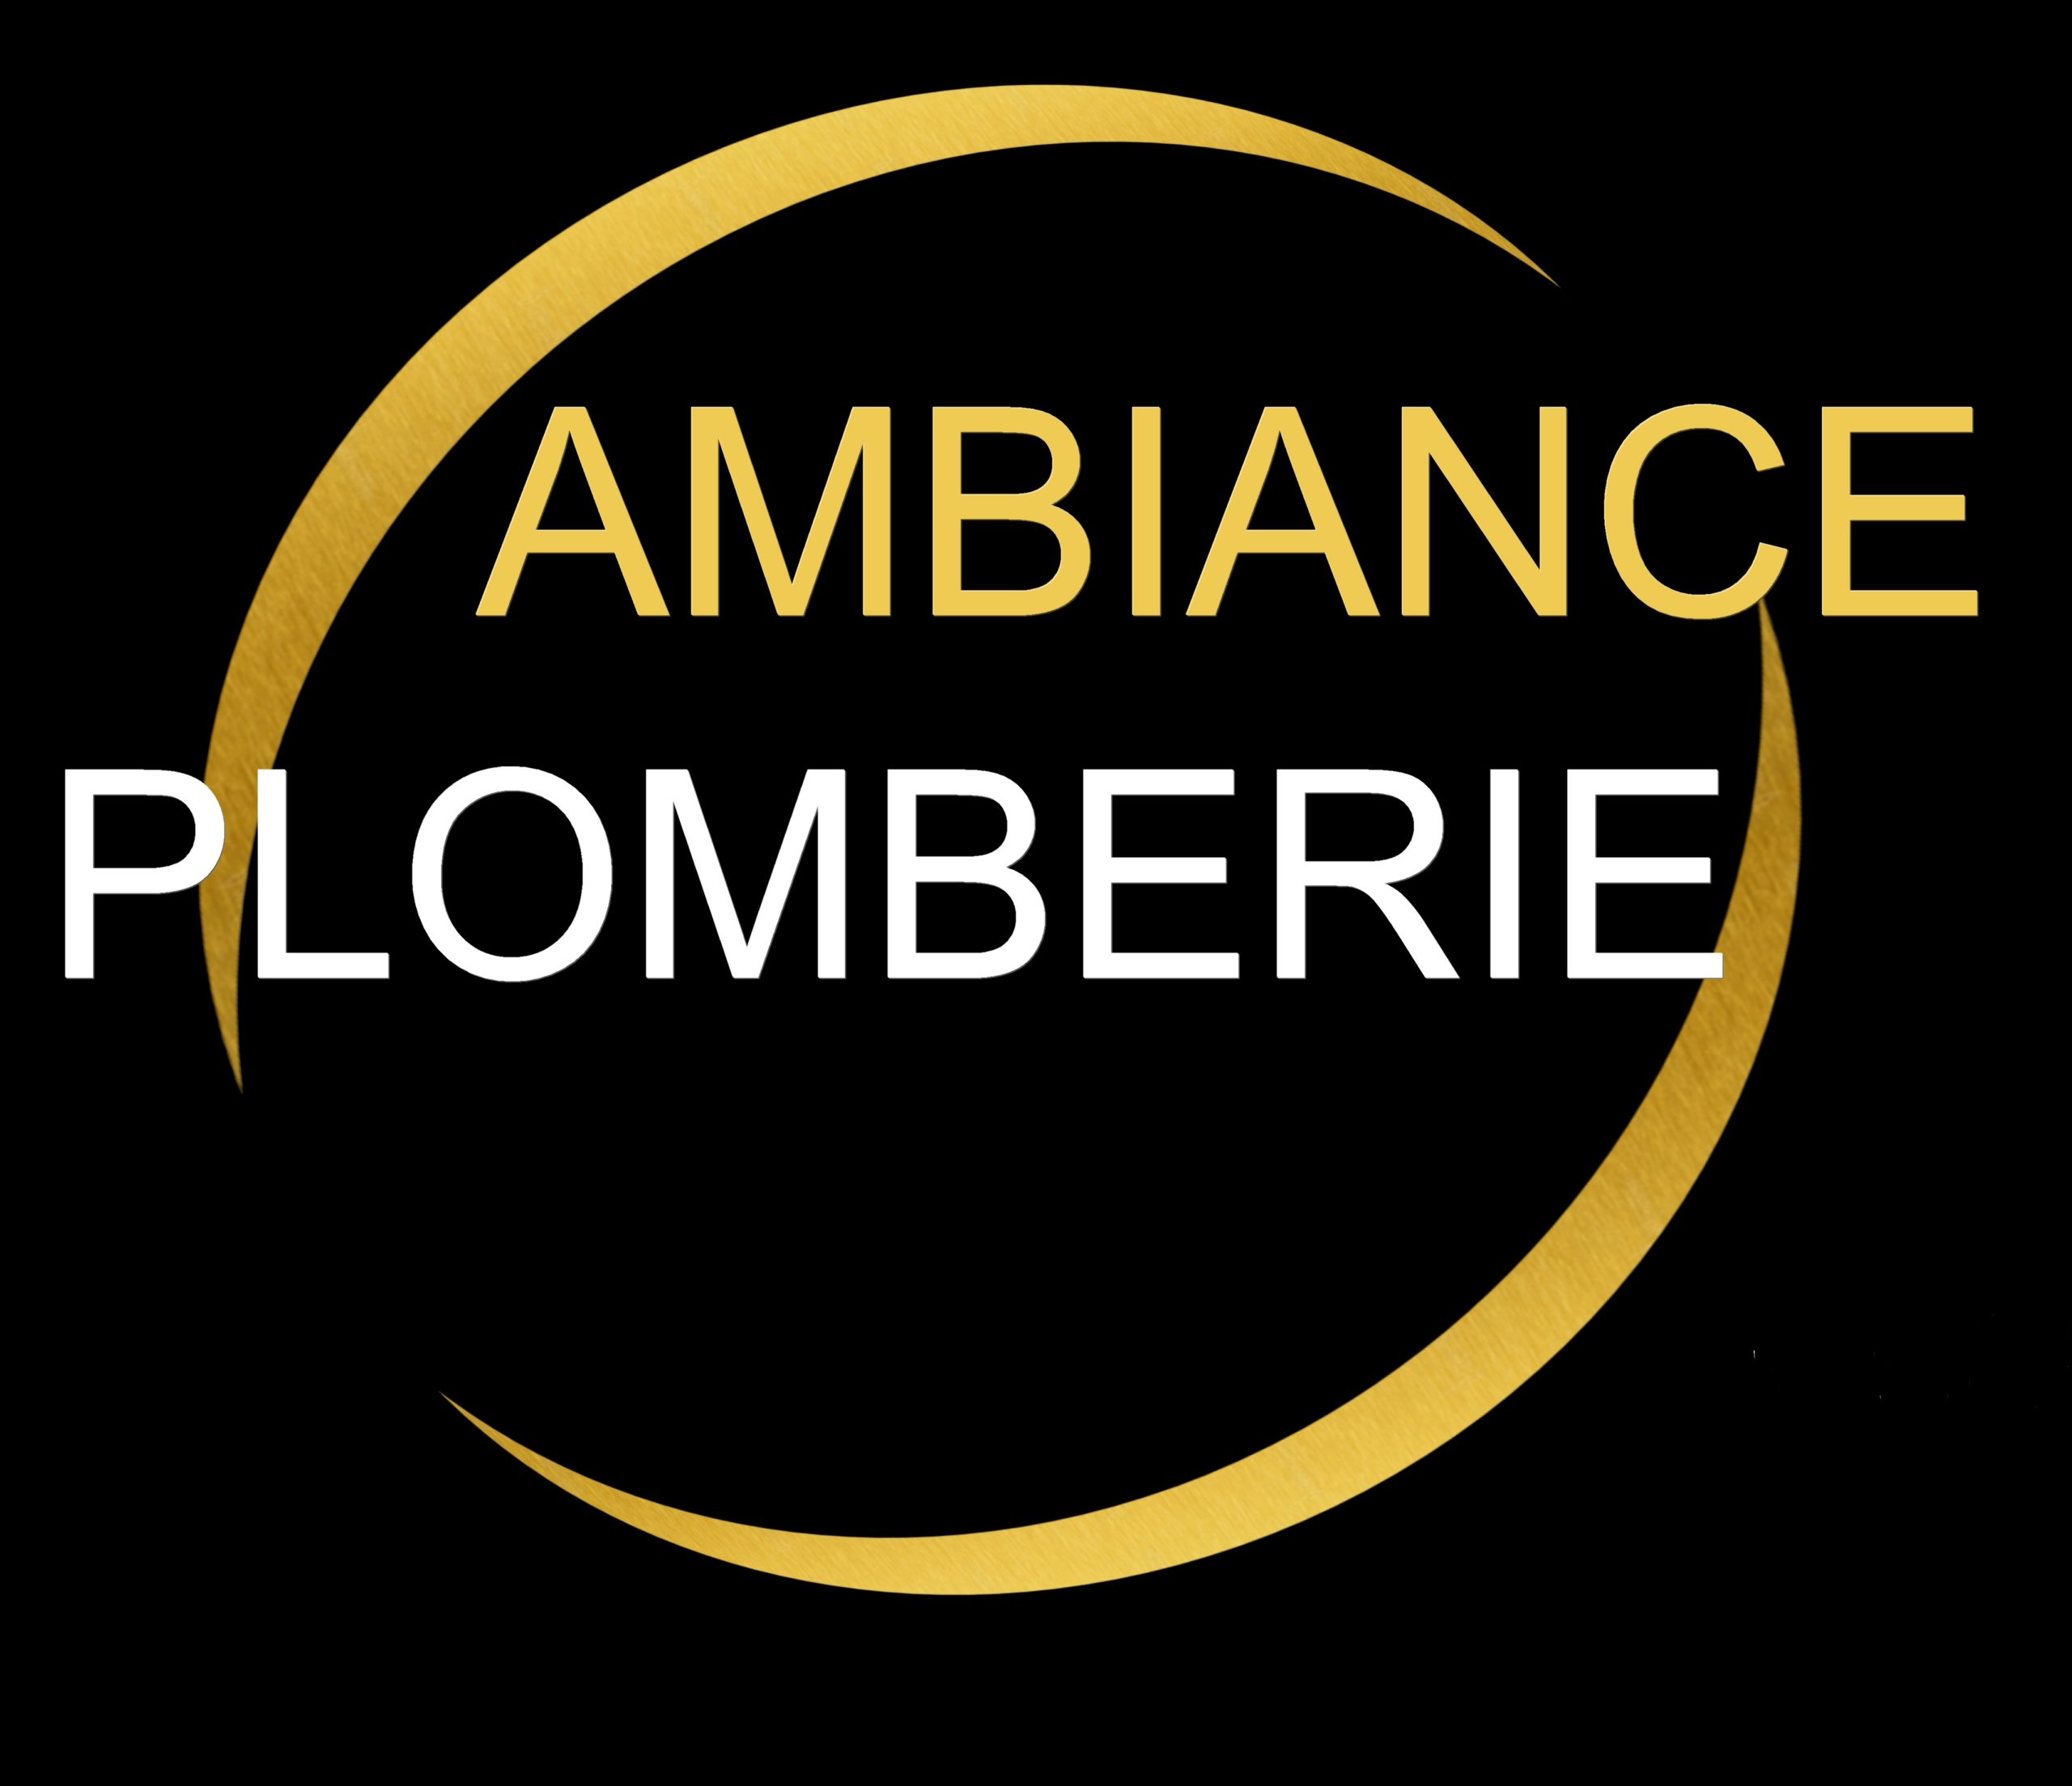 AMBIANCE PLOMBERIE